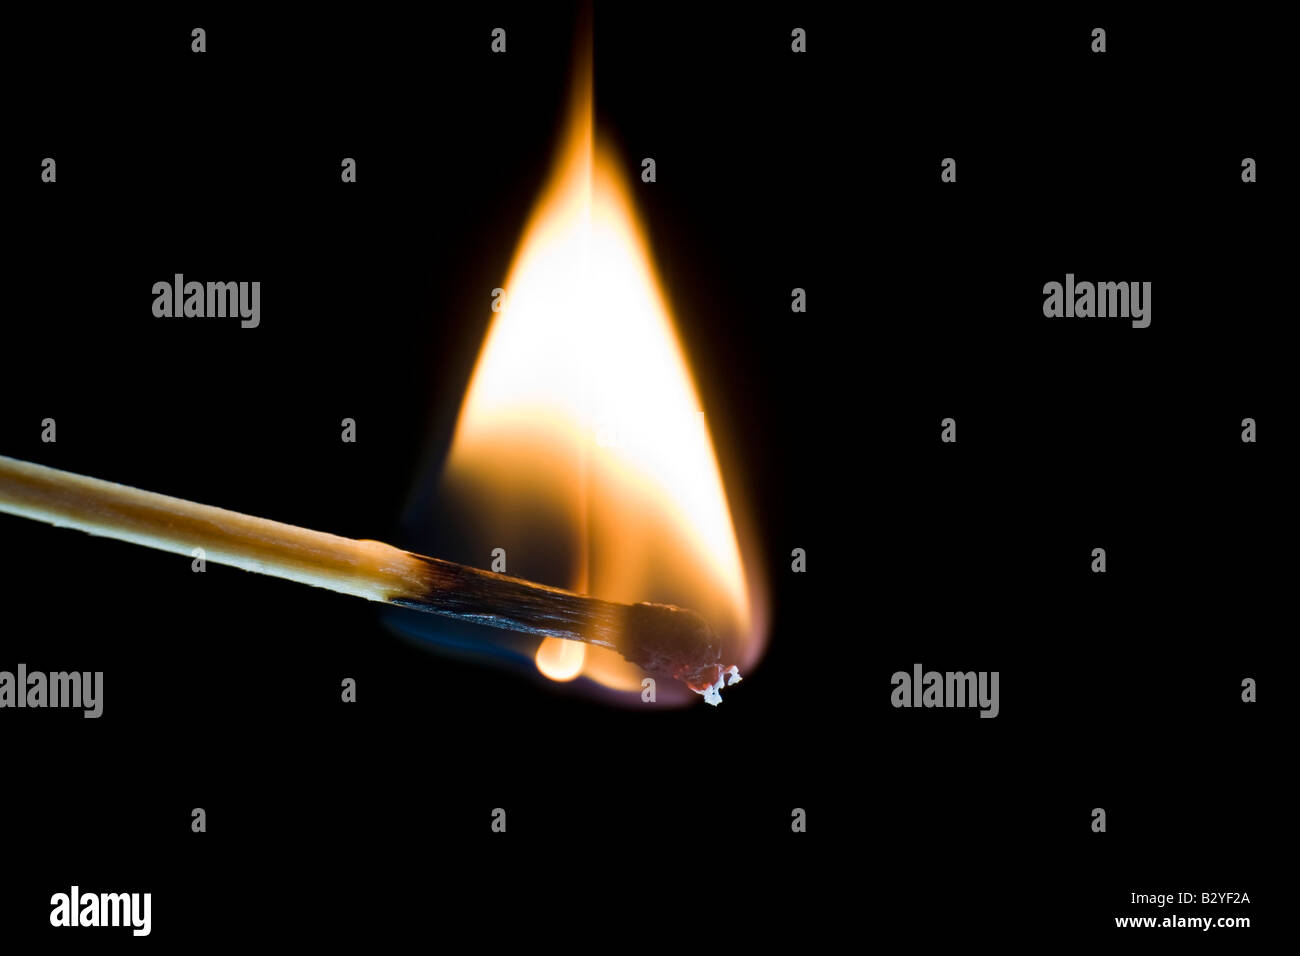 Macro shot of a burning match against a black background Stock Photo